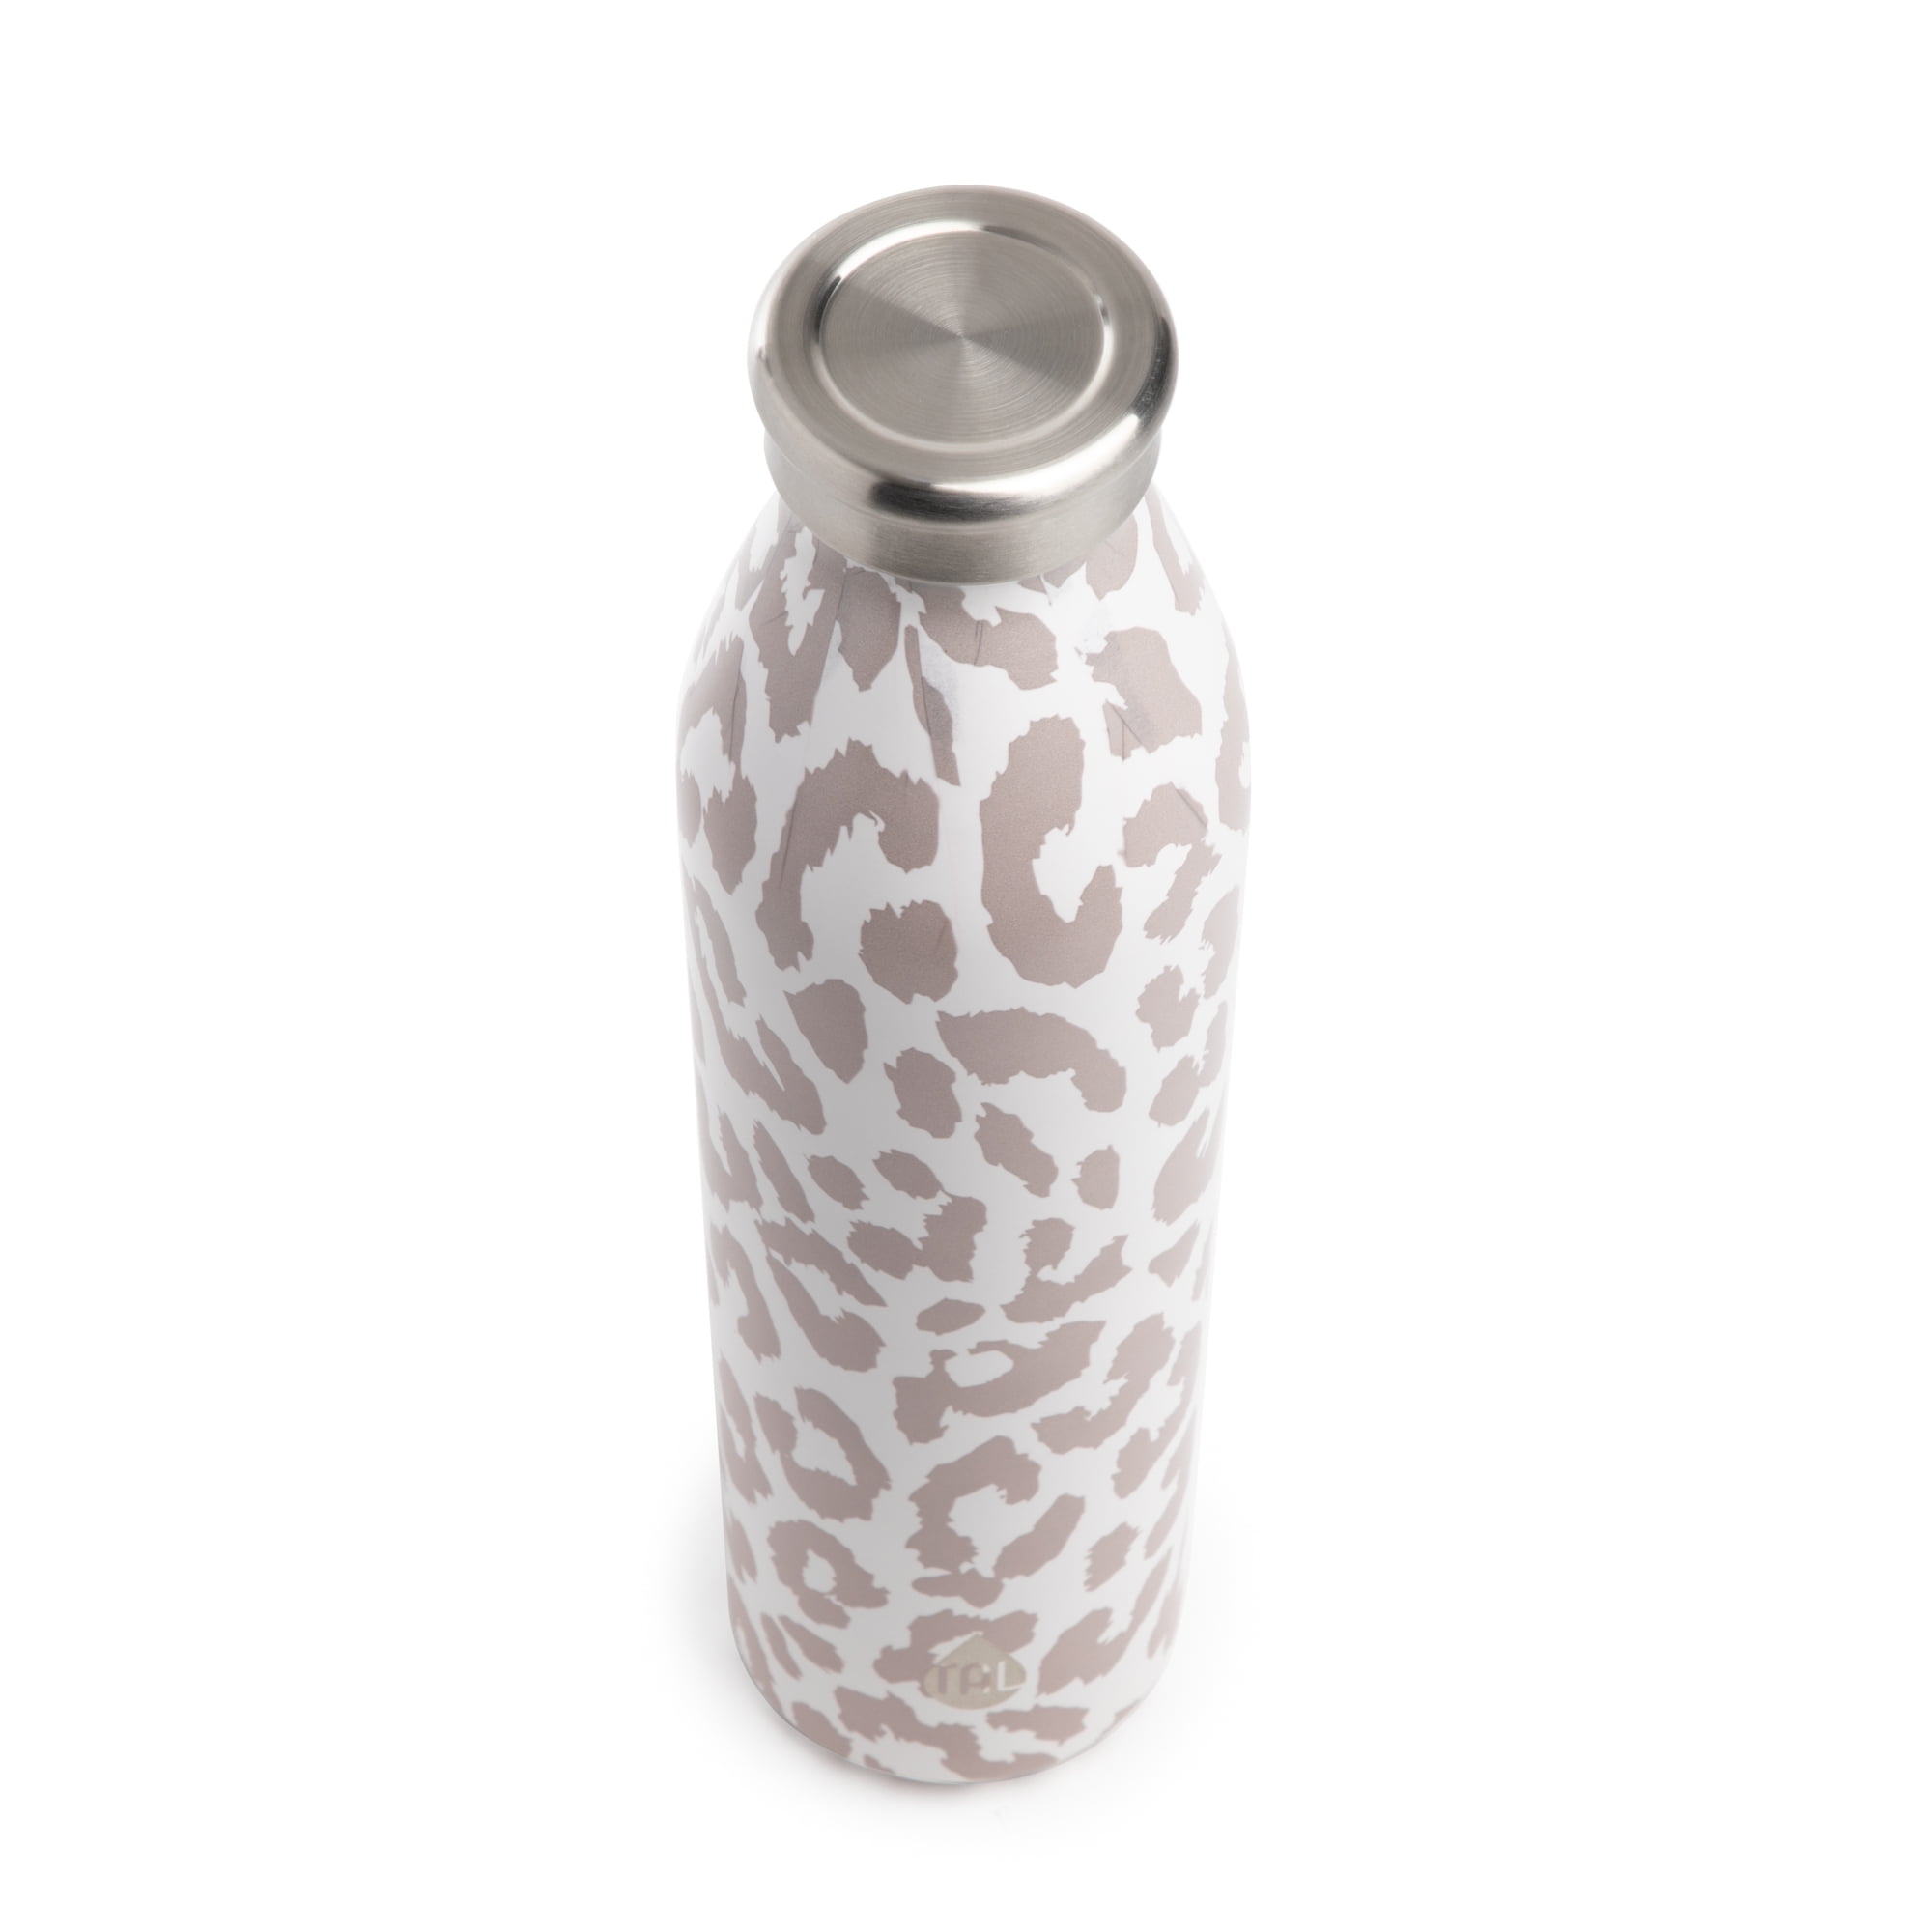 Tal 20 Oz Stainless Vacuum Insulated Modern Water Bottle, Leopard 